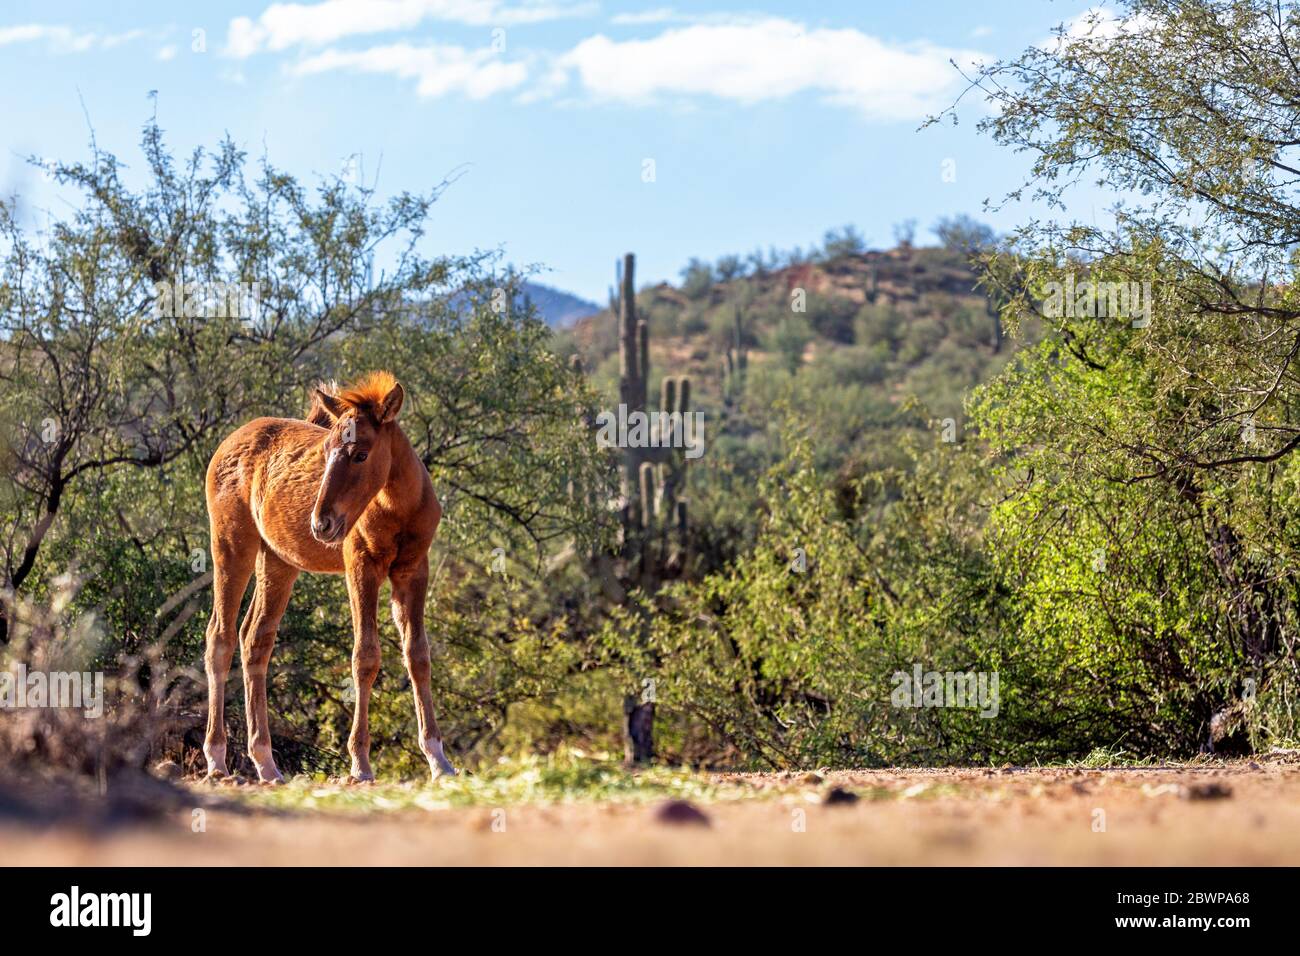 Cute young wild horse foal in beautiful Arizona USA travel scene with saguaro cactus and mountains in the background Stock Photo